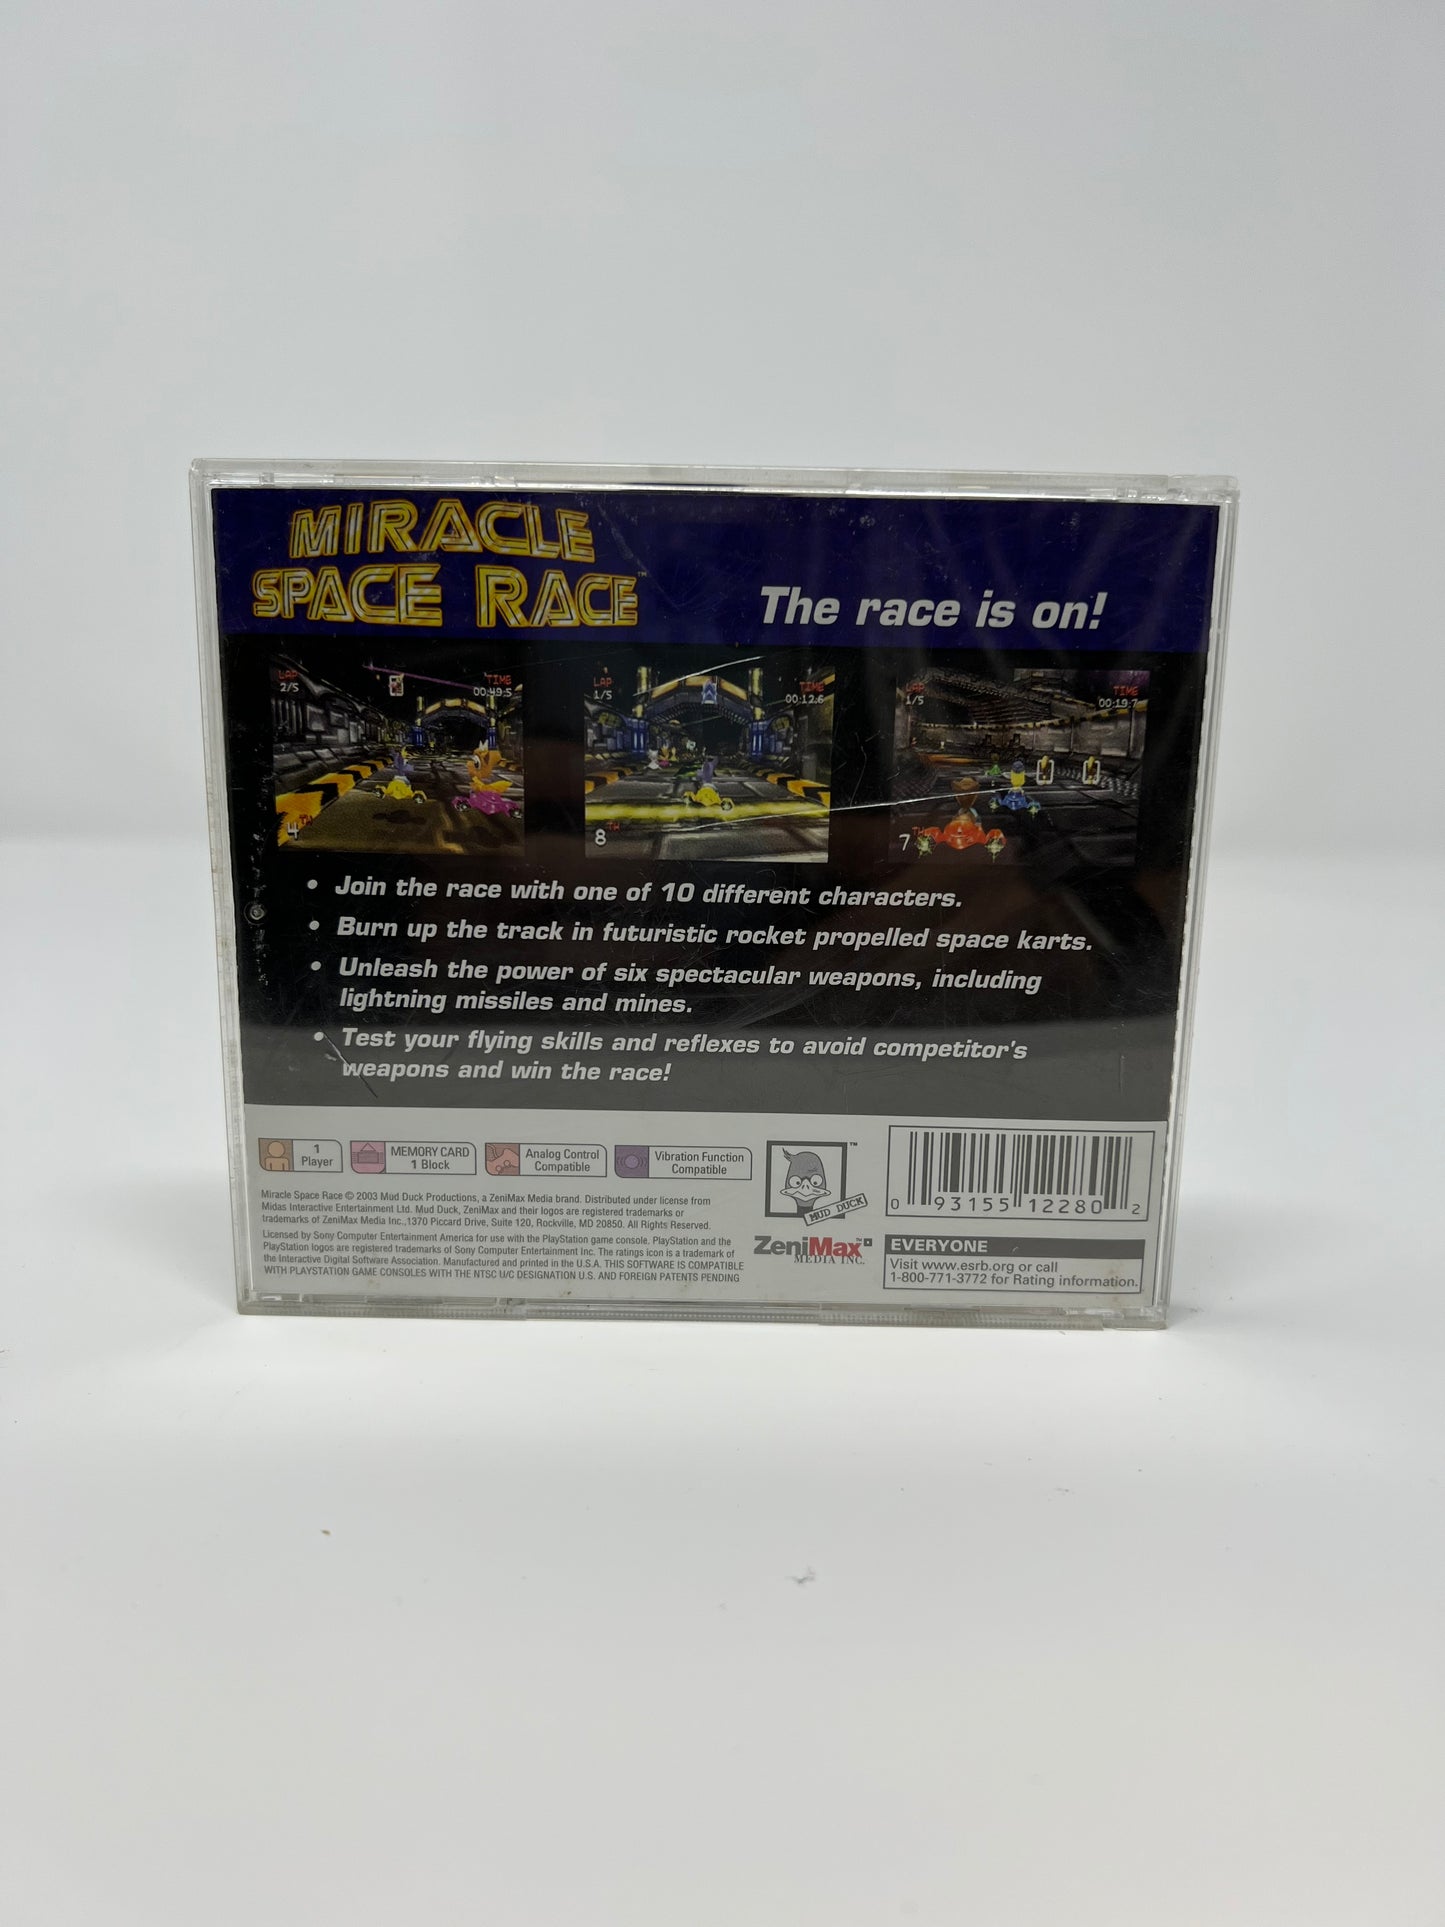 Miracle Space Race - PS1 Game - Used